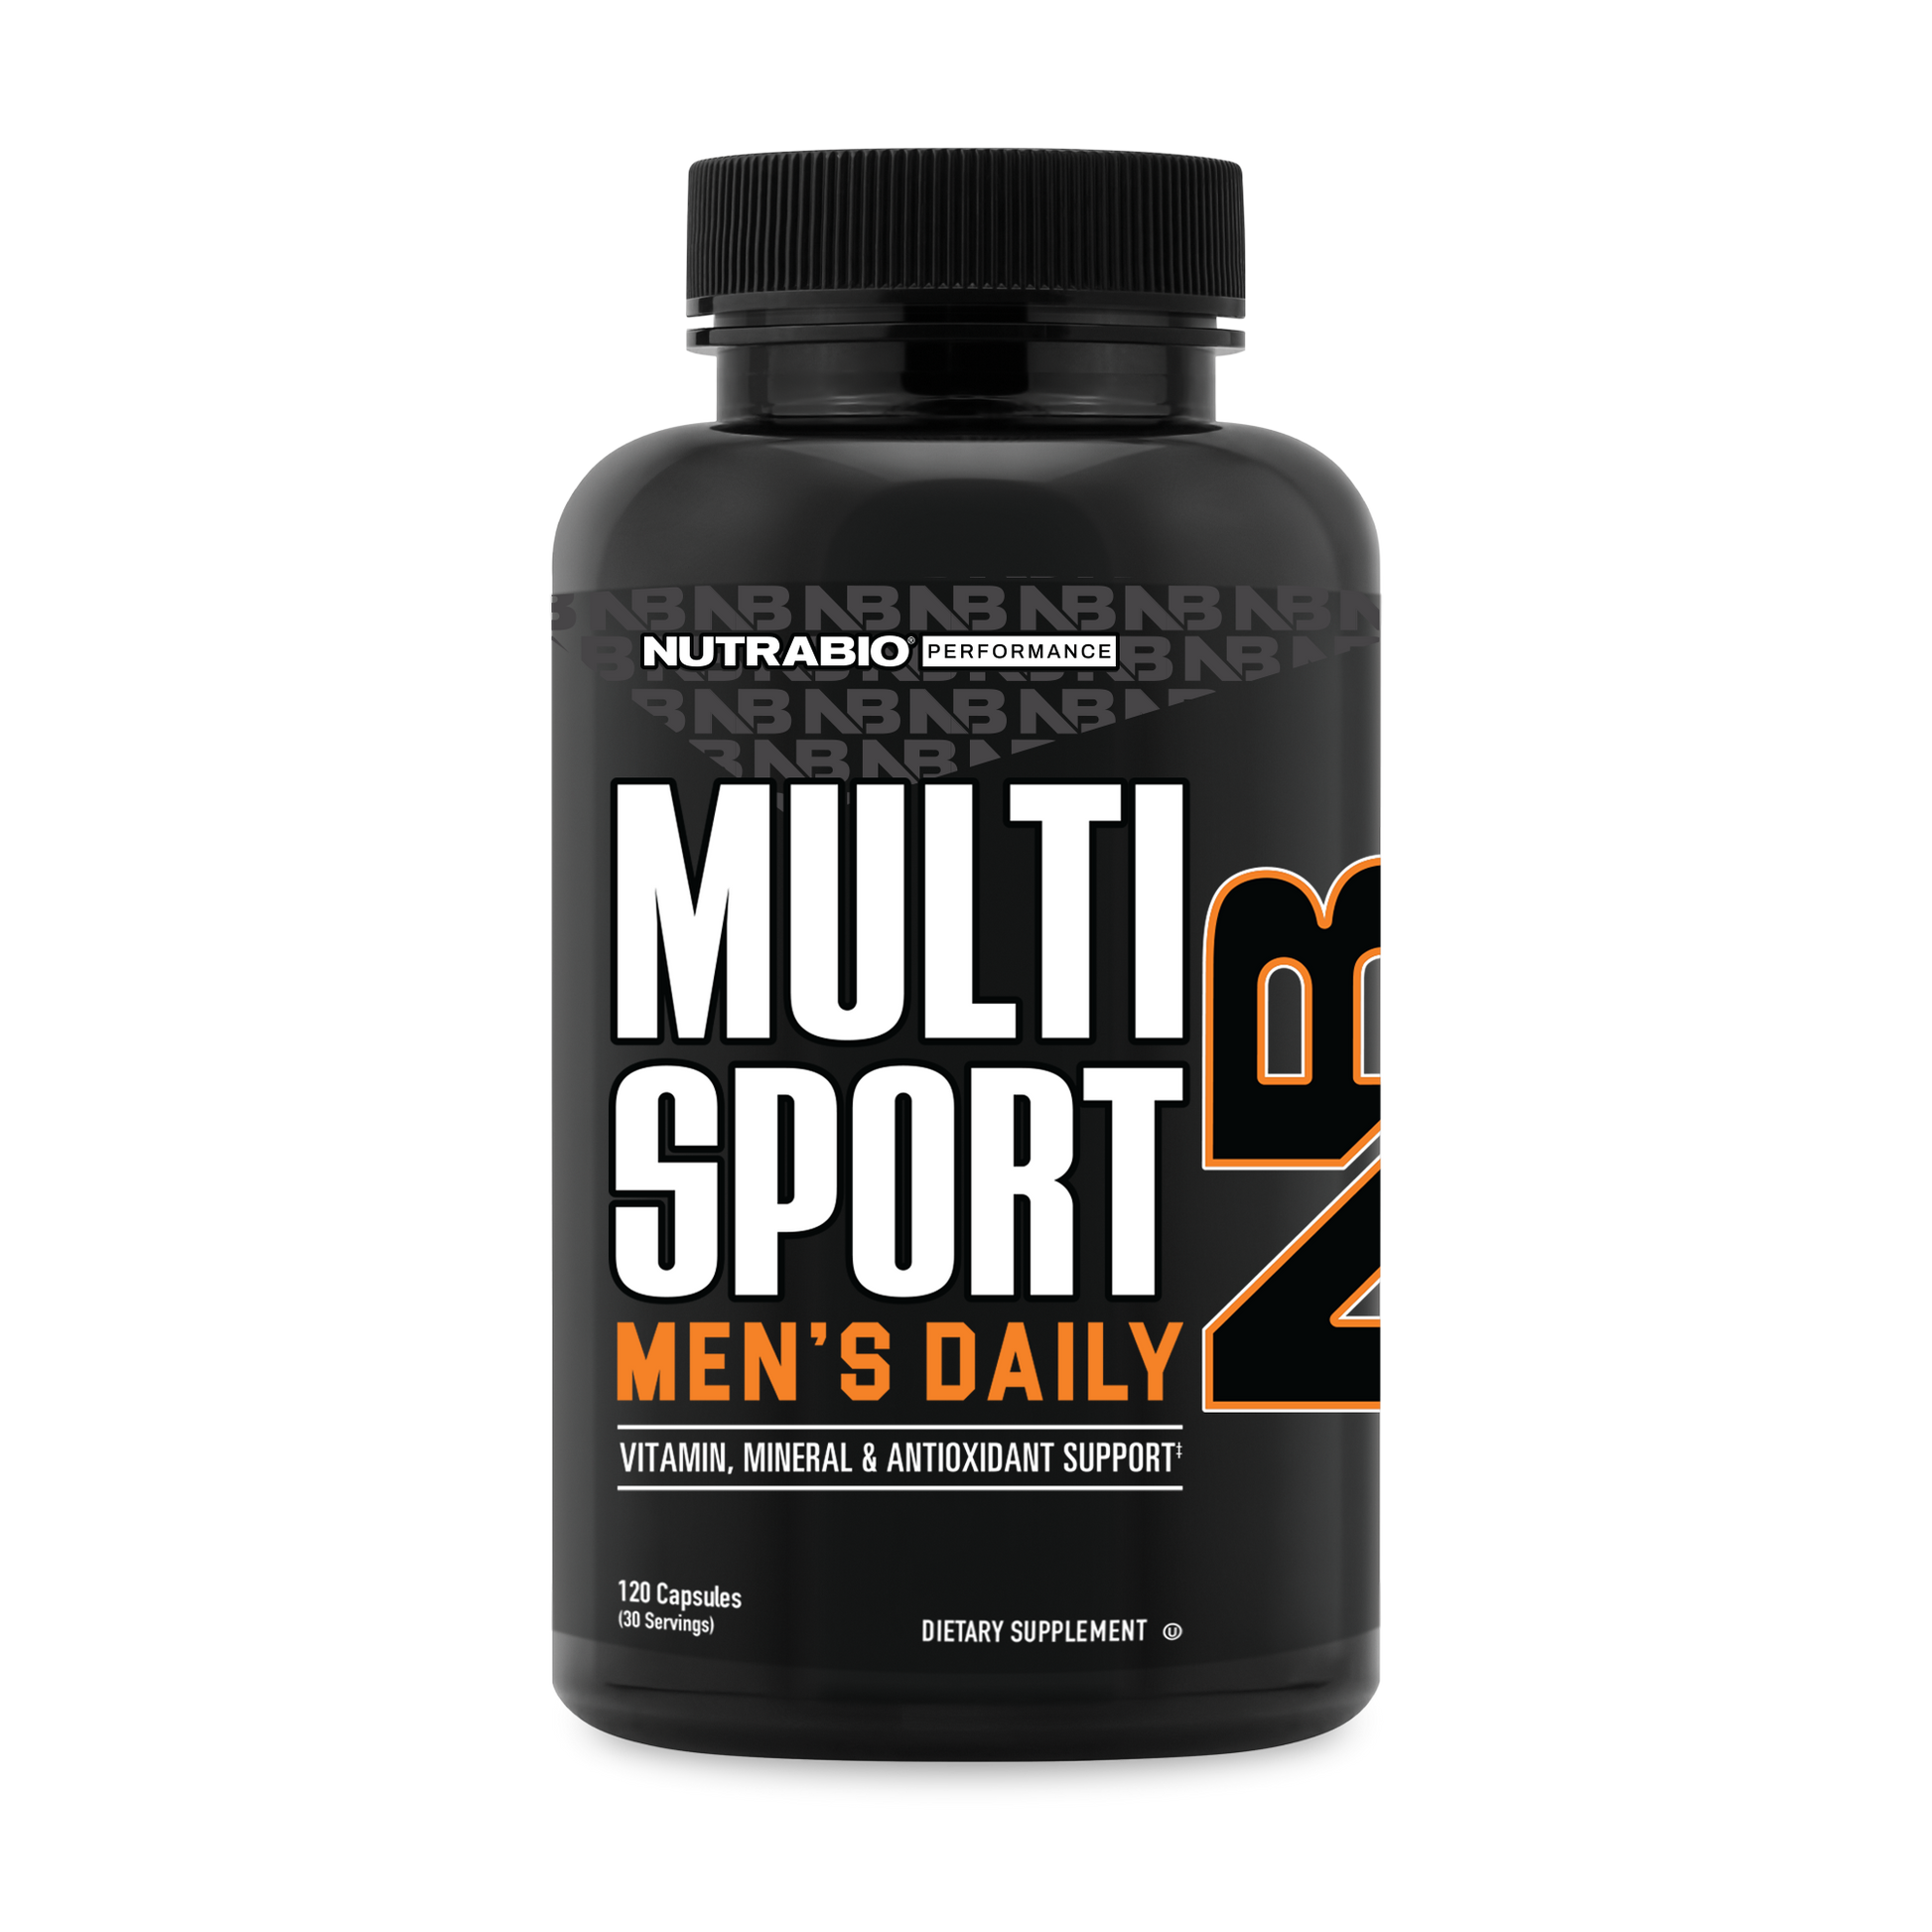 Multivitamin for athletic performance